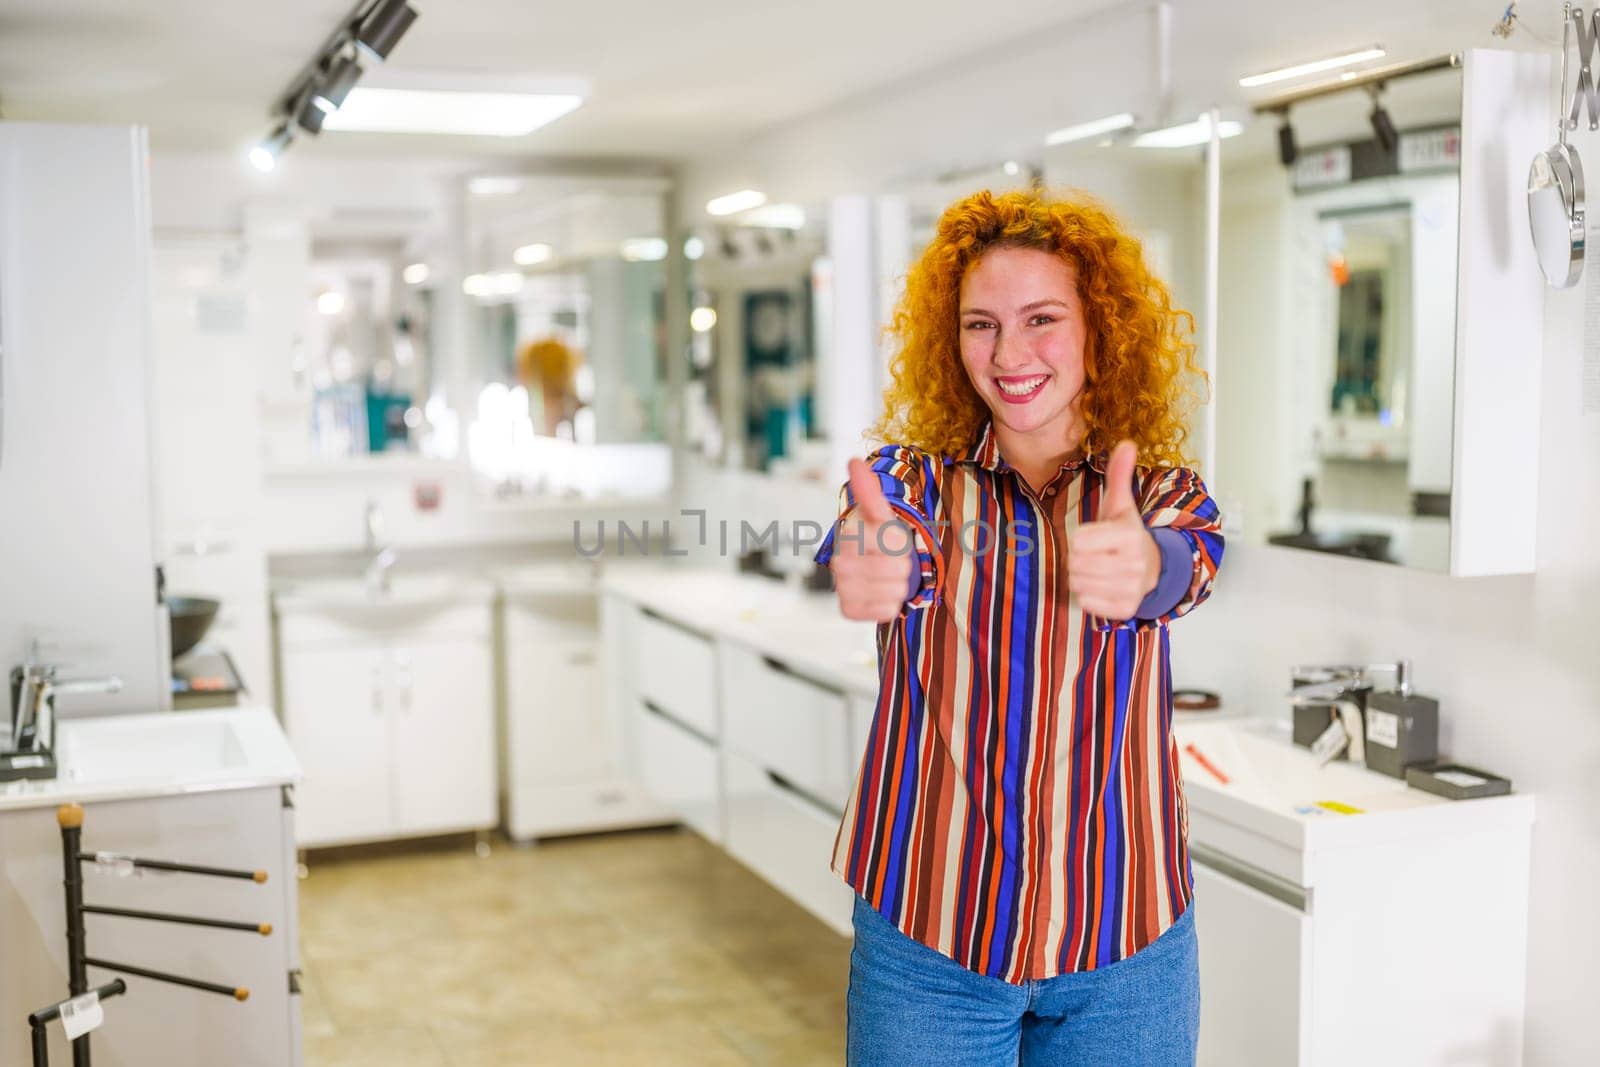 Portrait of salesperson in bathroom store. Happy redhead woman works in bath store. Sales occupation.